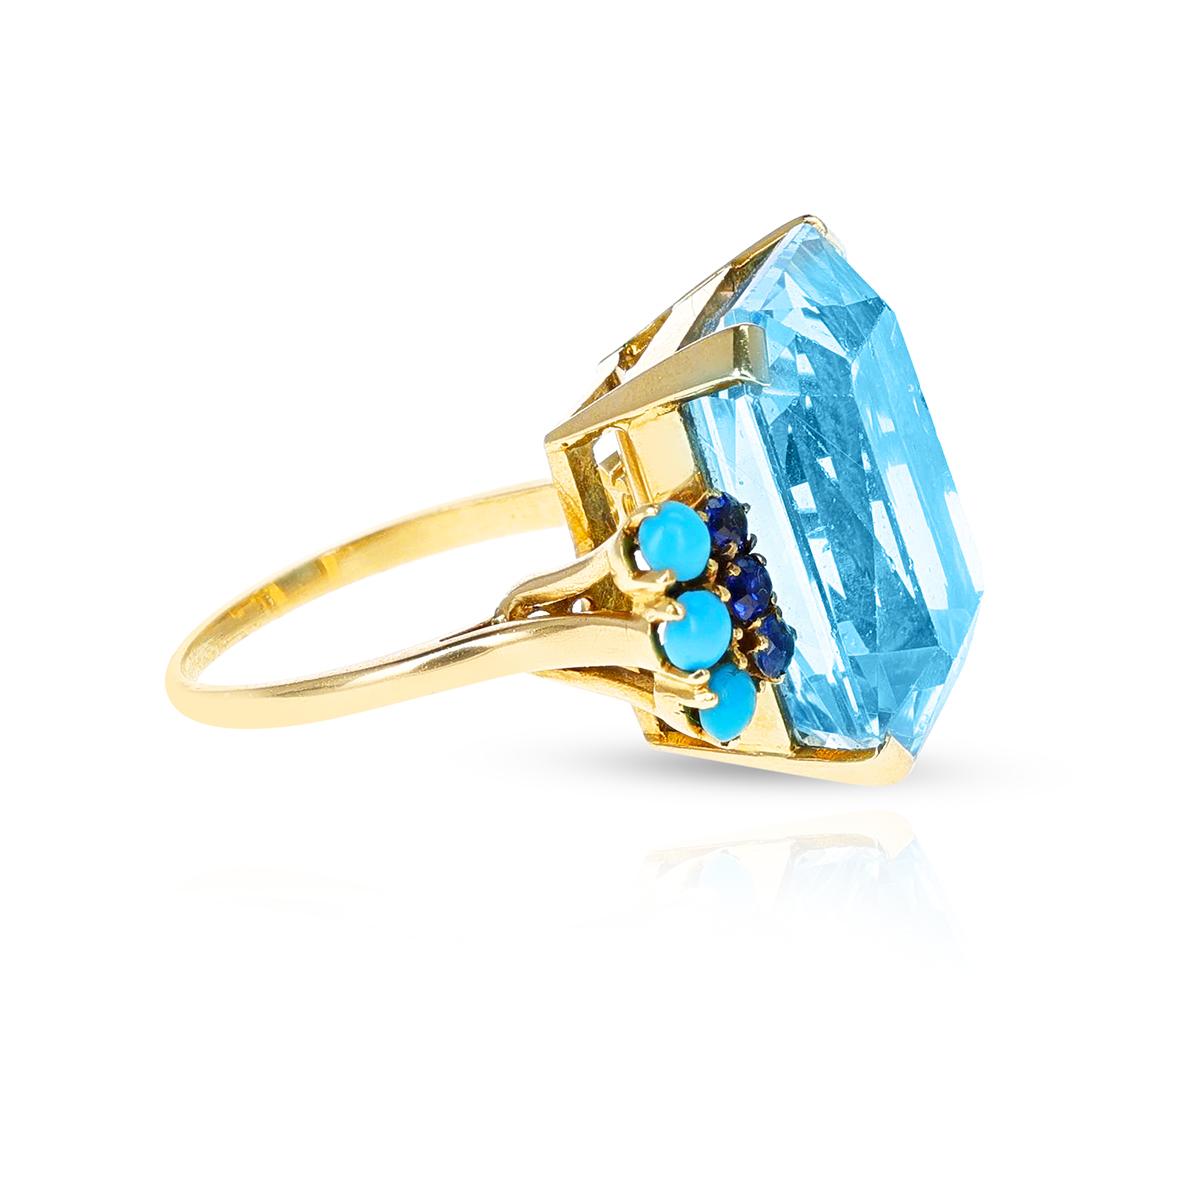 Emerald Cut 25 Ct. Aquamarine, Sapphire and Turquoise Cocktail Ring, 18k